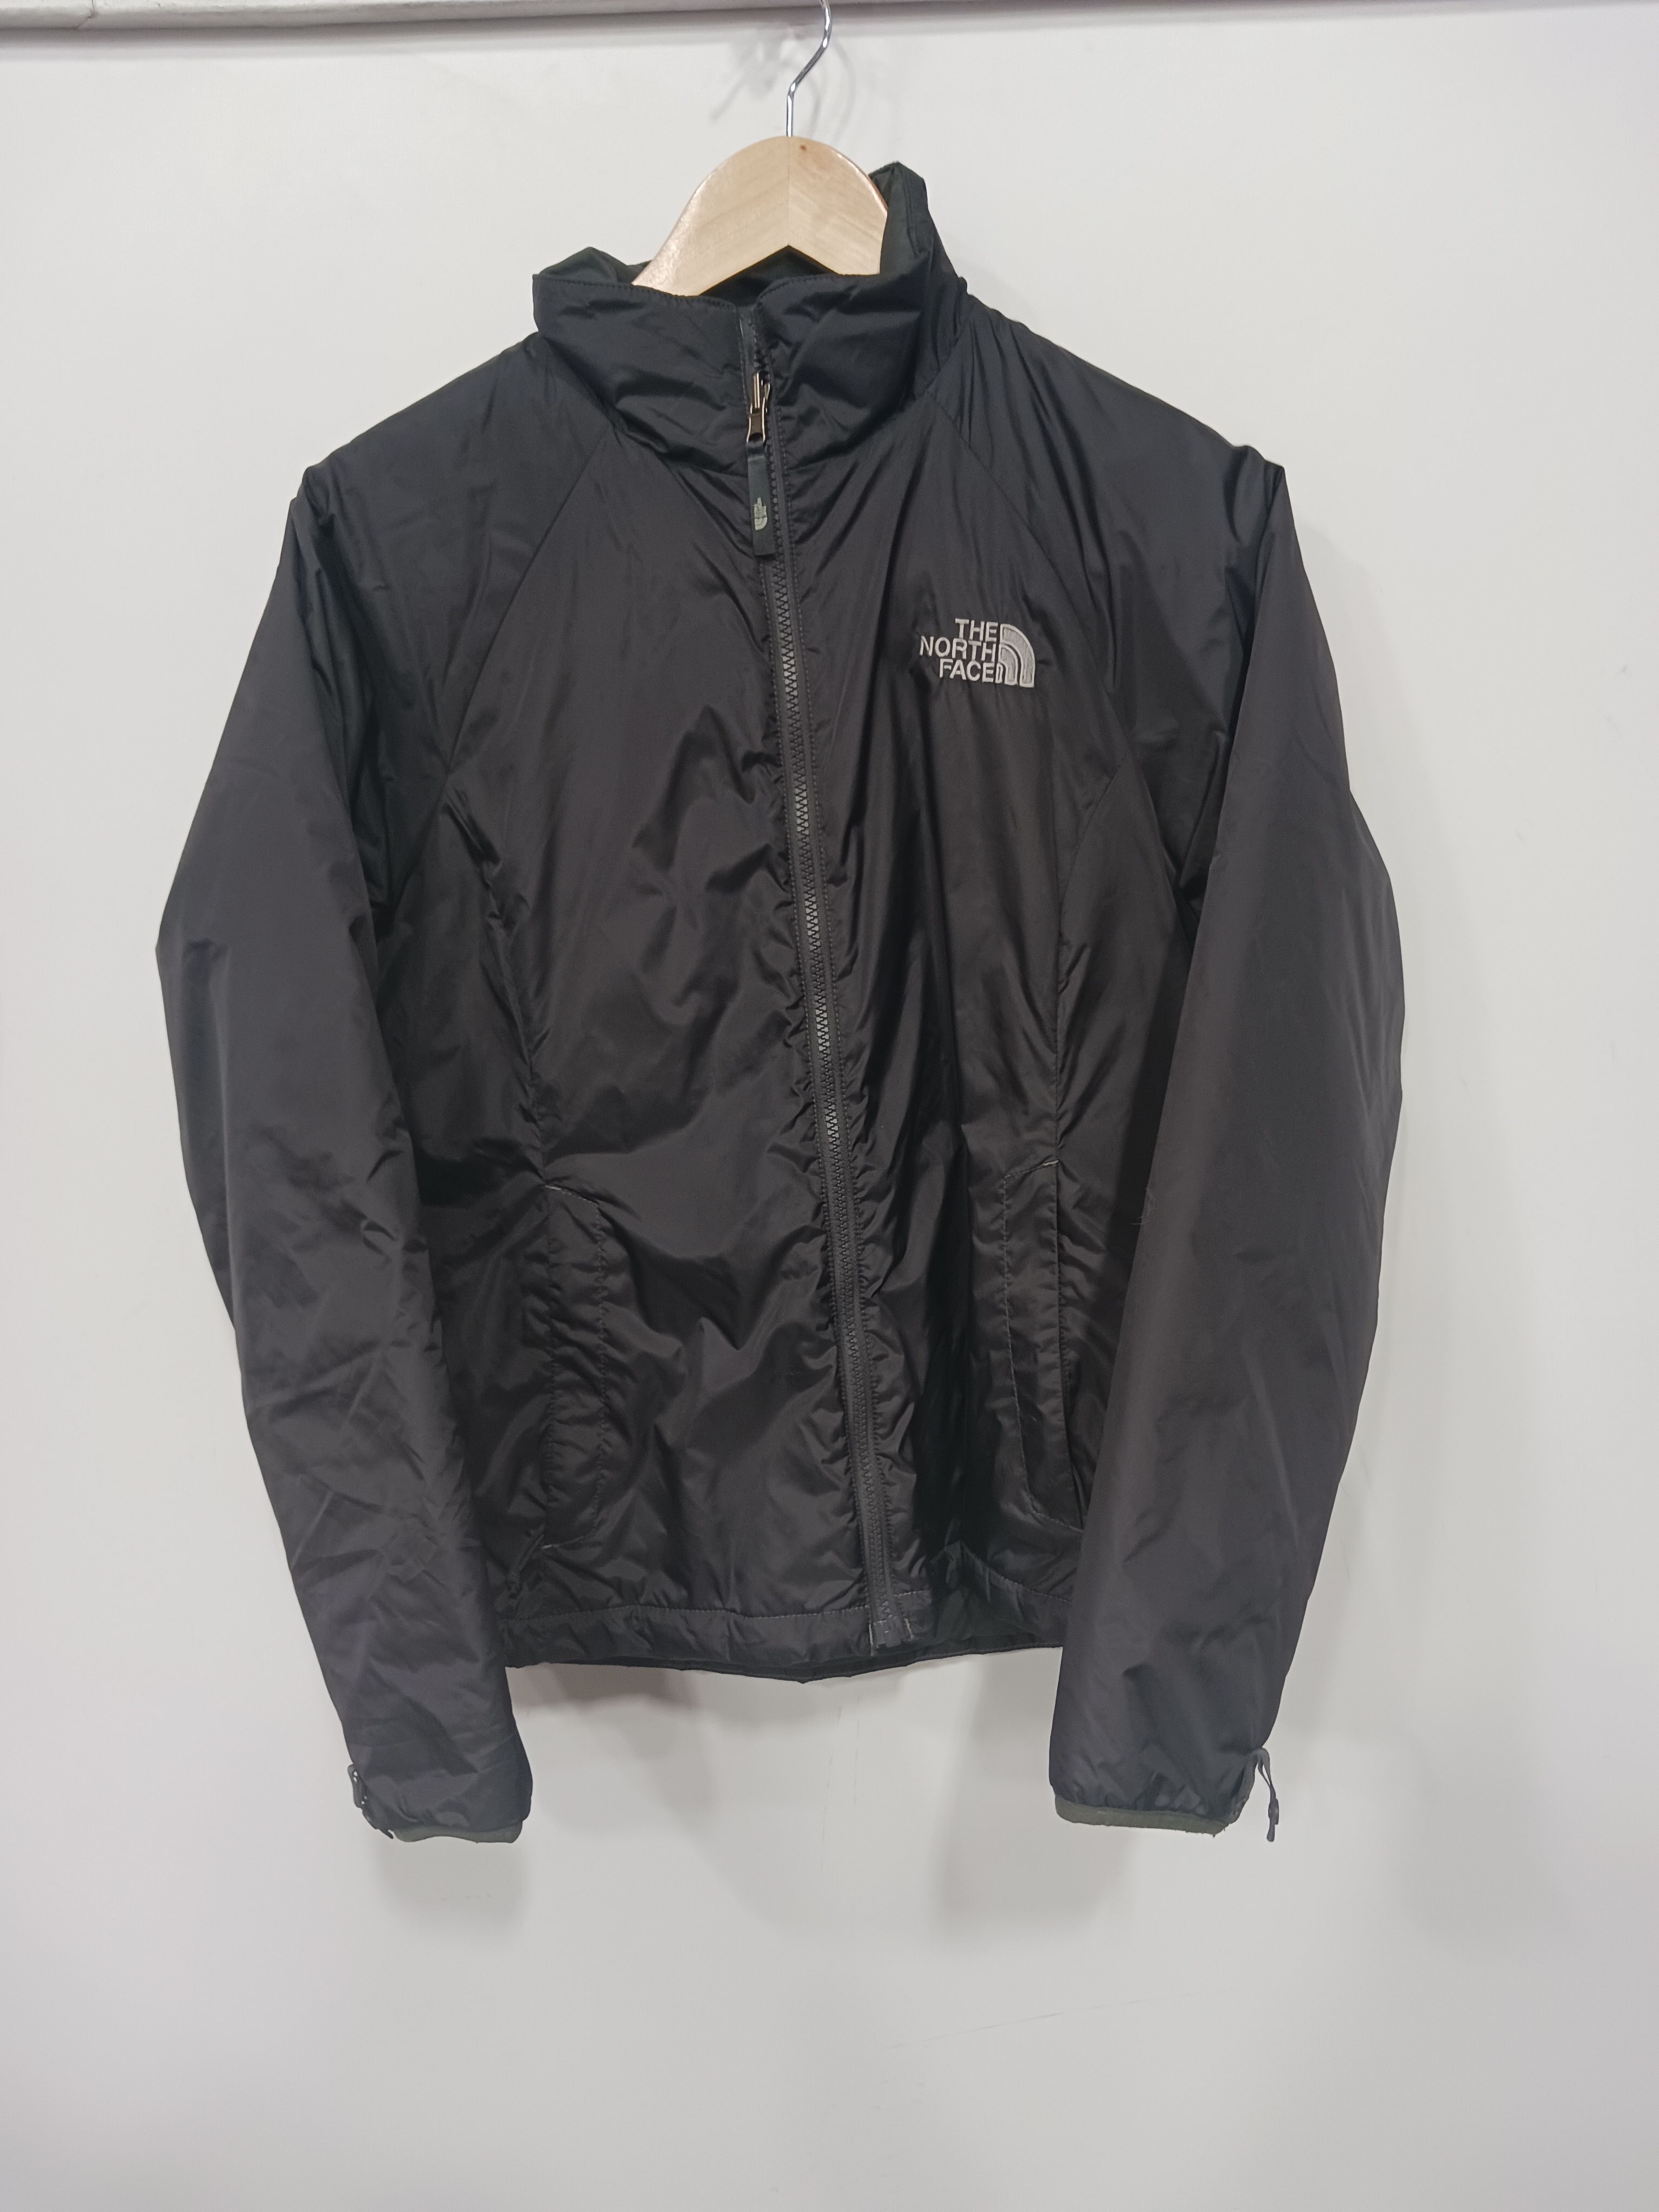 Buy The North Face Full Zip Puffer Style Jacket Size Medium for USD 26.99 |  GoodwillFinds